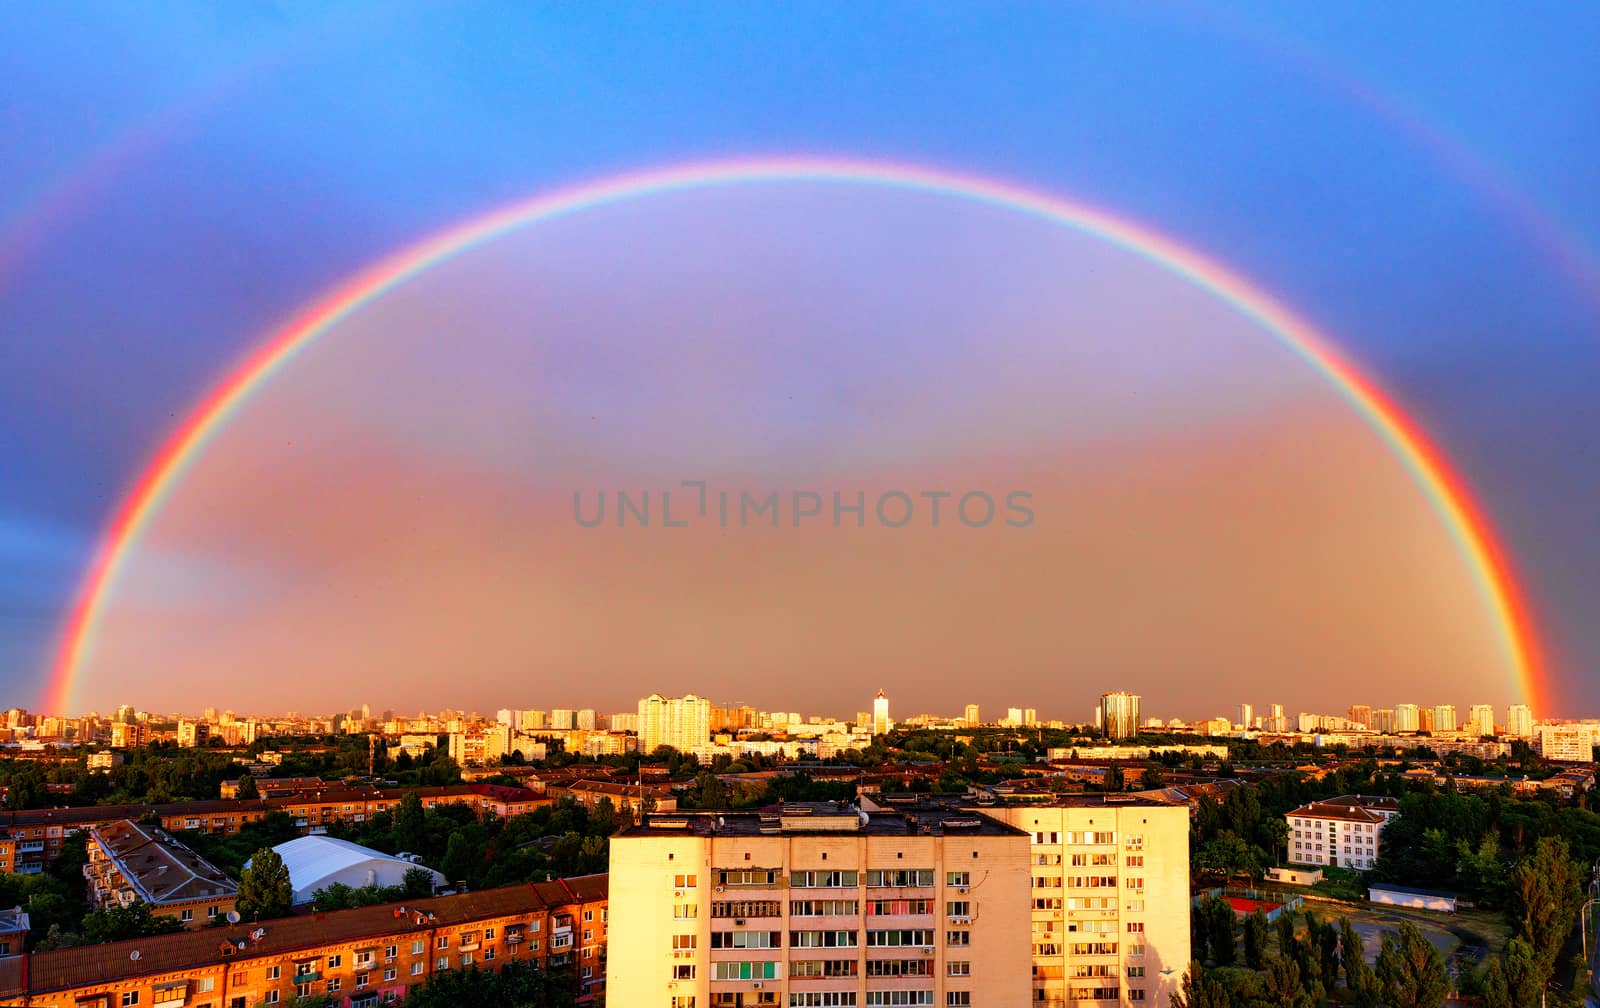 Panorama of an urban residential area and a huge rainbow illuminated by the sun against the backdrop of the evening sky.